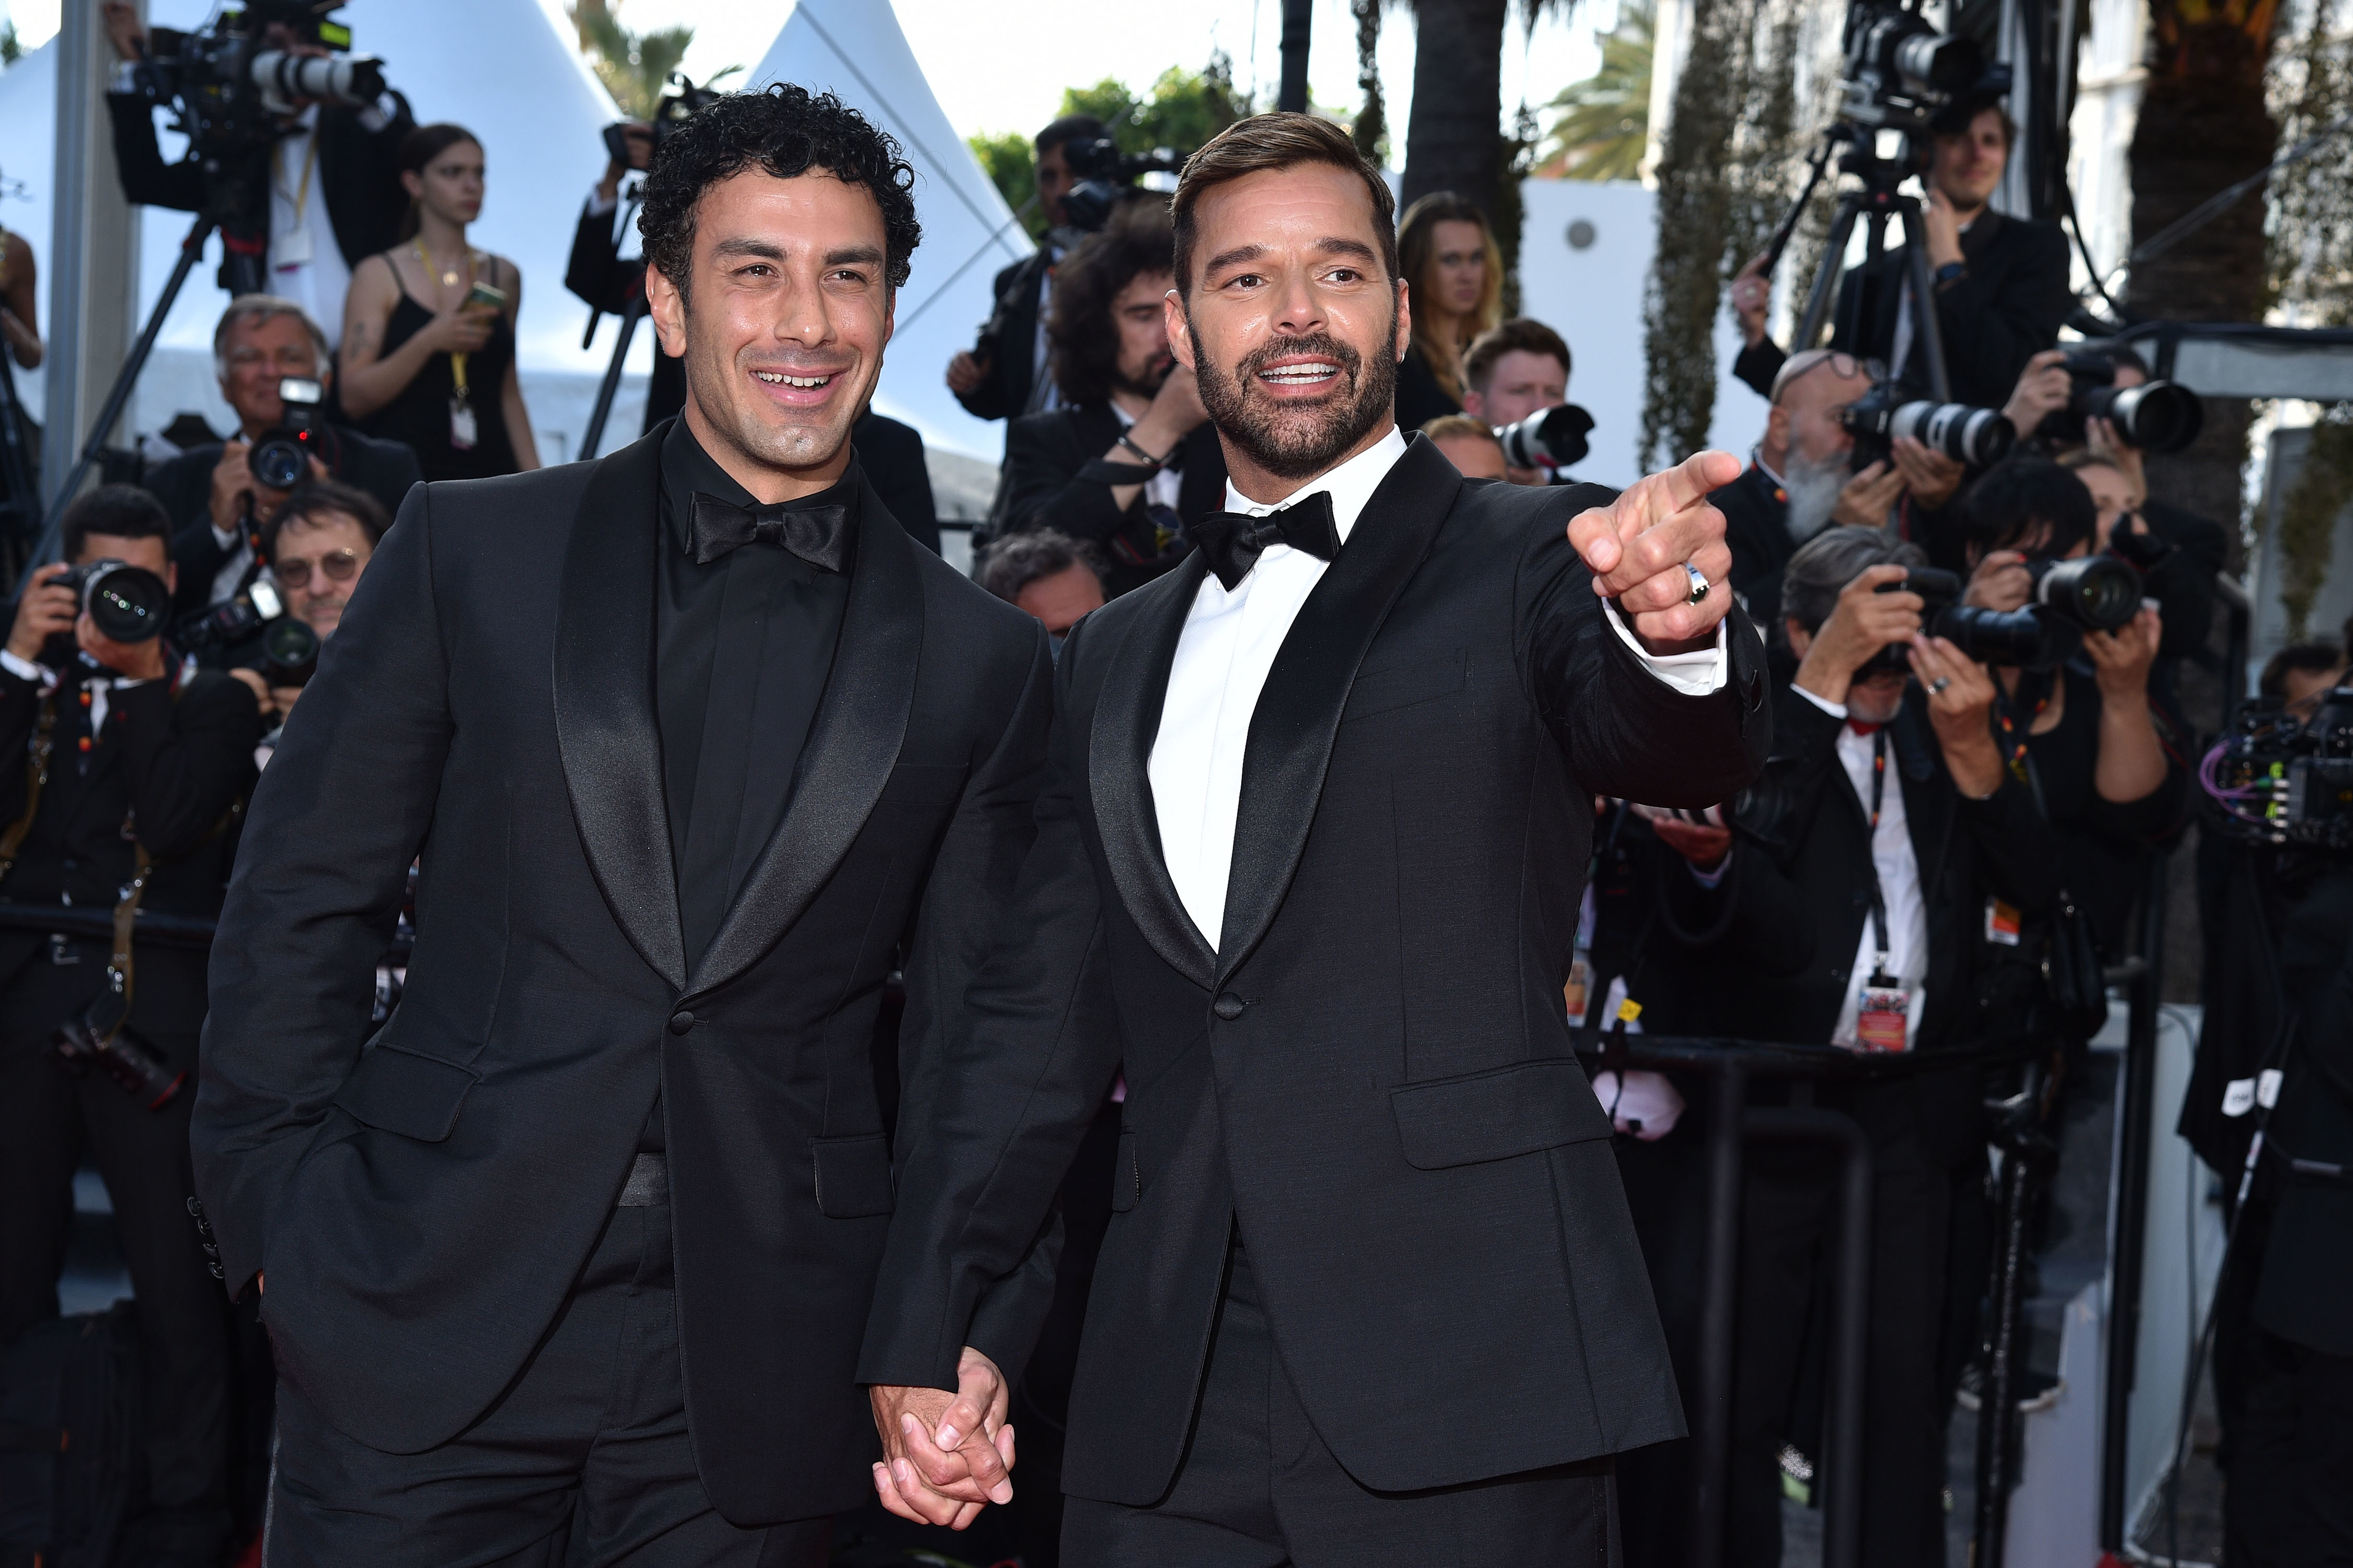 Close-up of Ricky and Jwan in tuxedos and holding hands at a media event